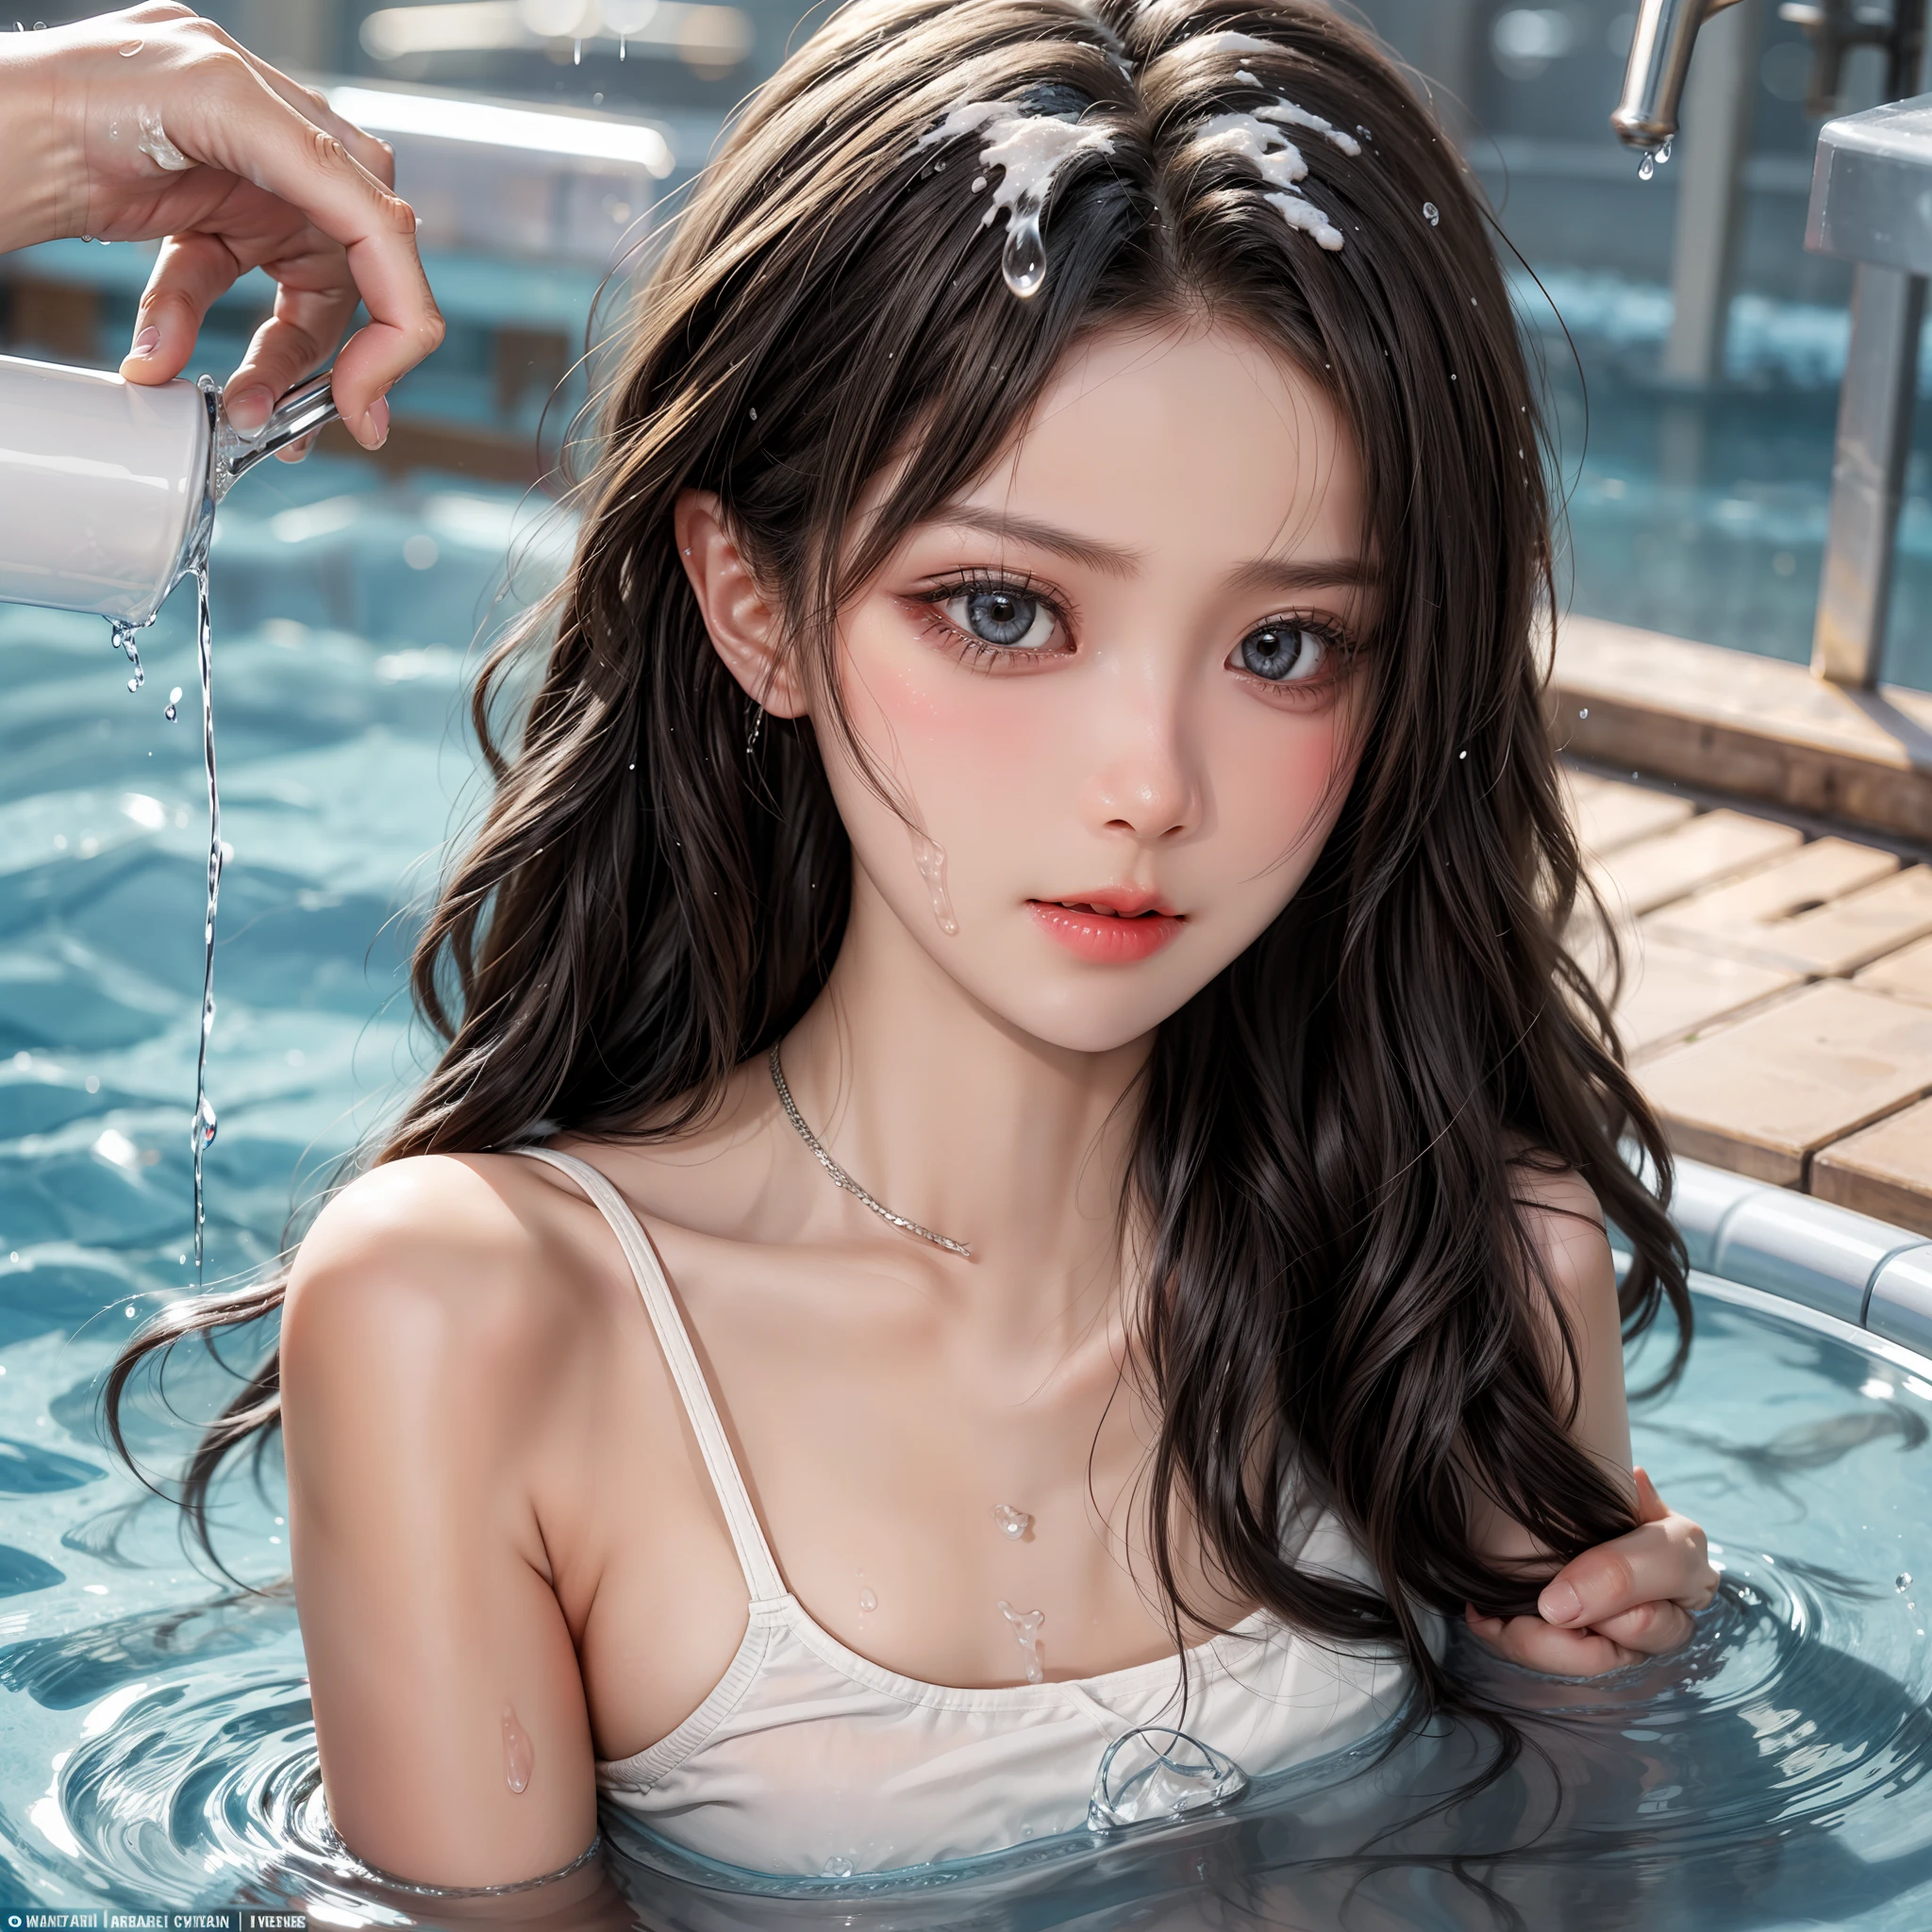 The young girl's face was stained with water, and the white substance on the girl's face and head spread all over her body, with a lustful expression